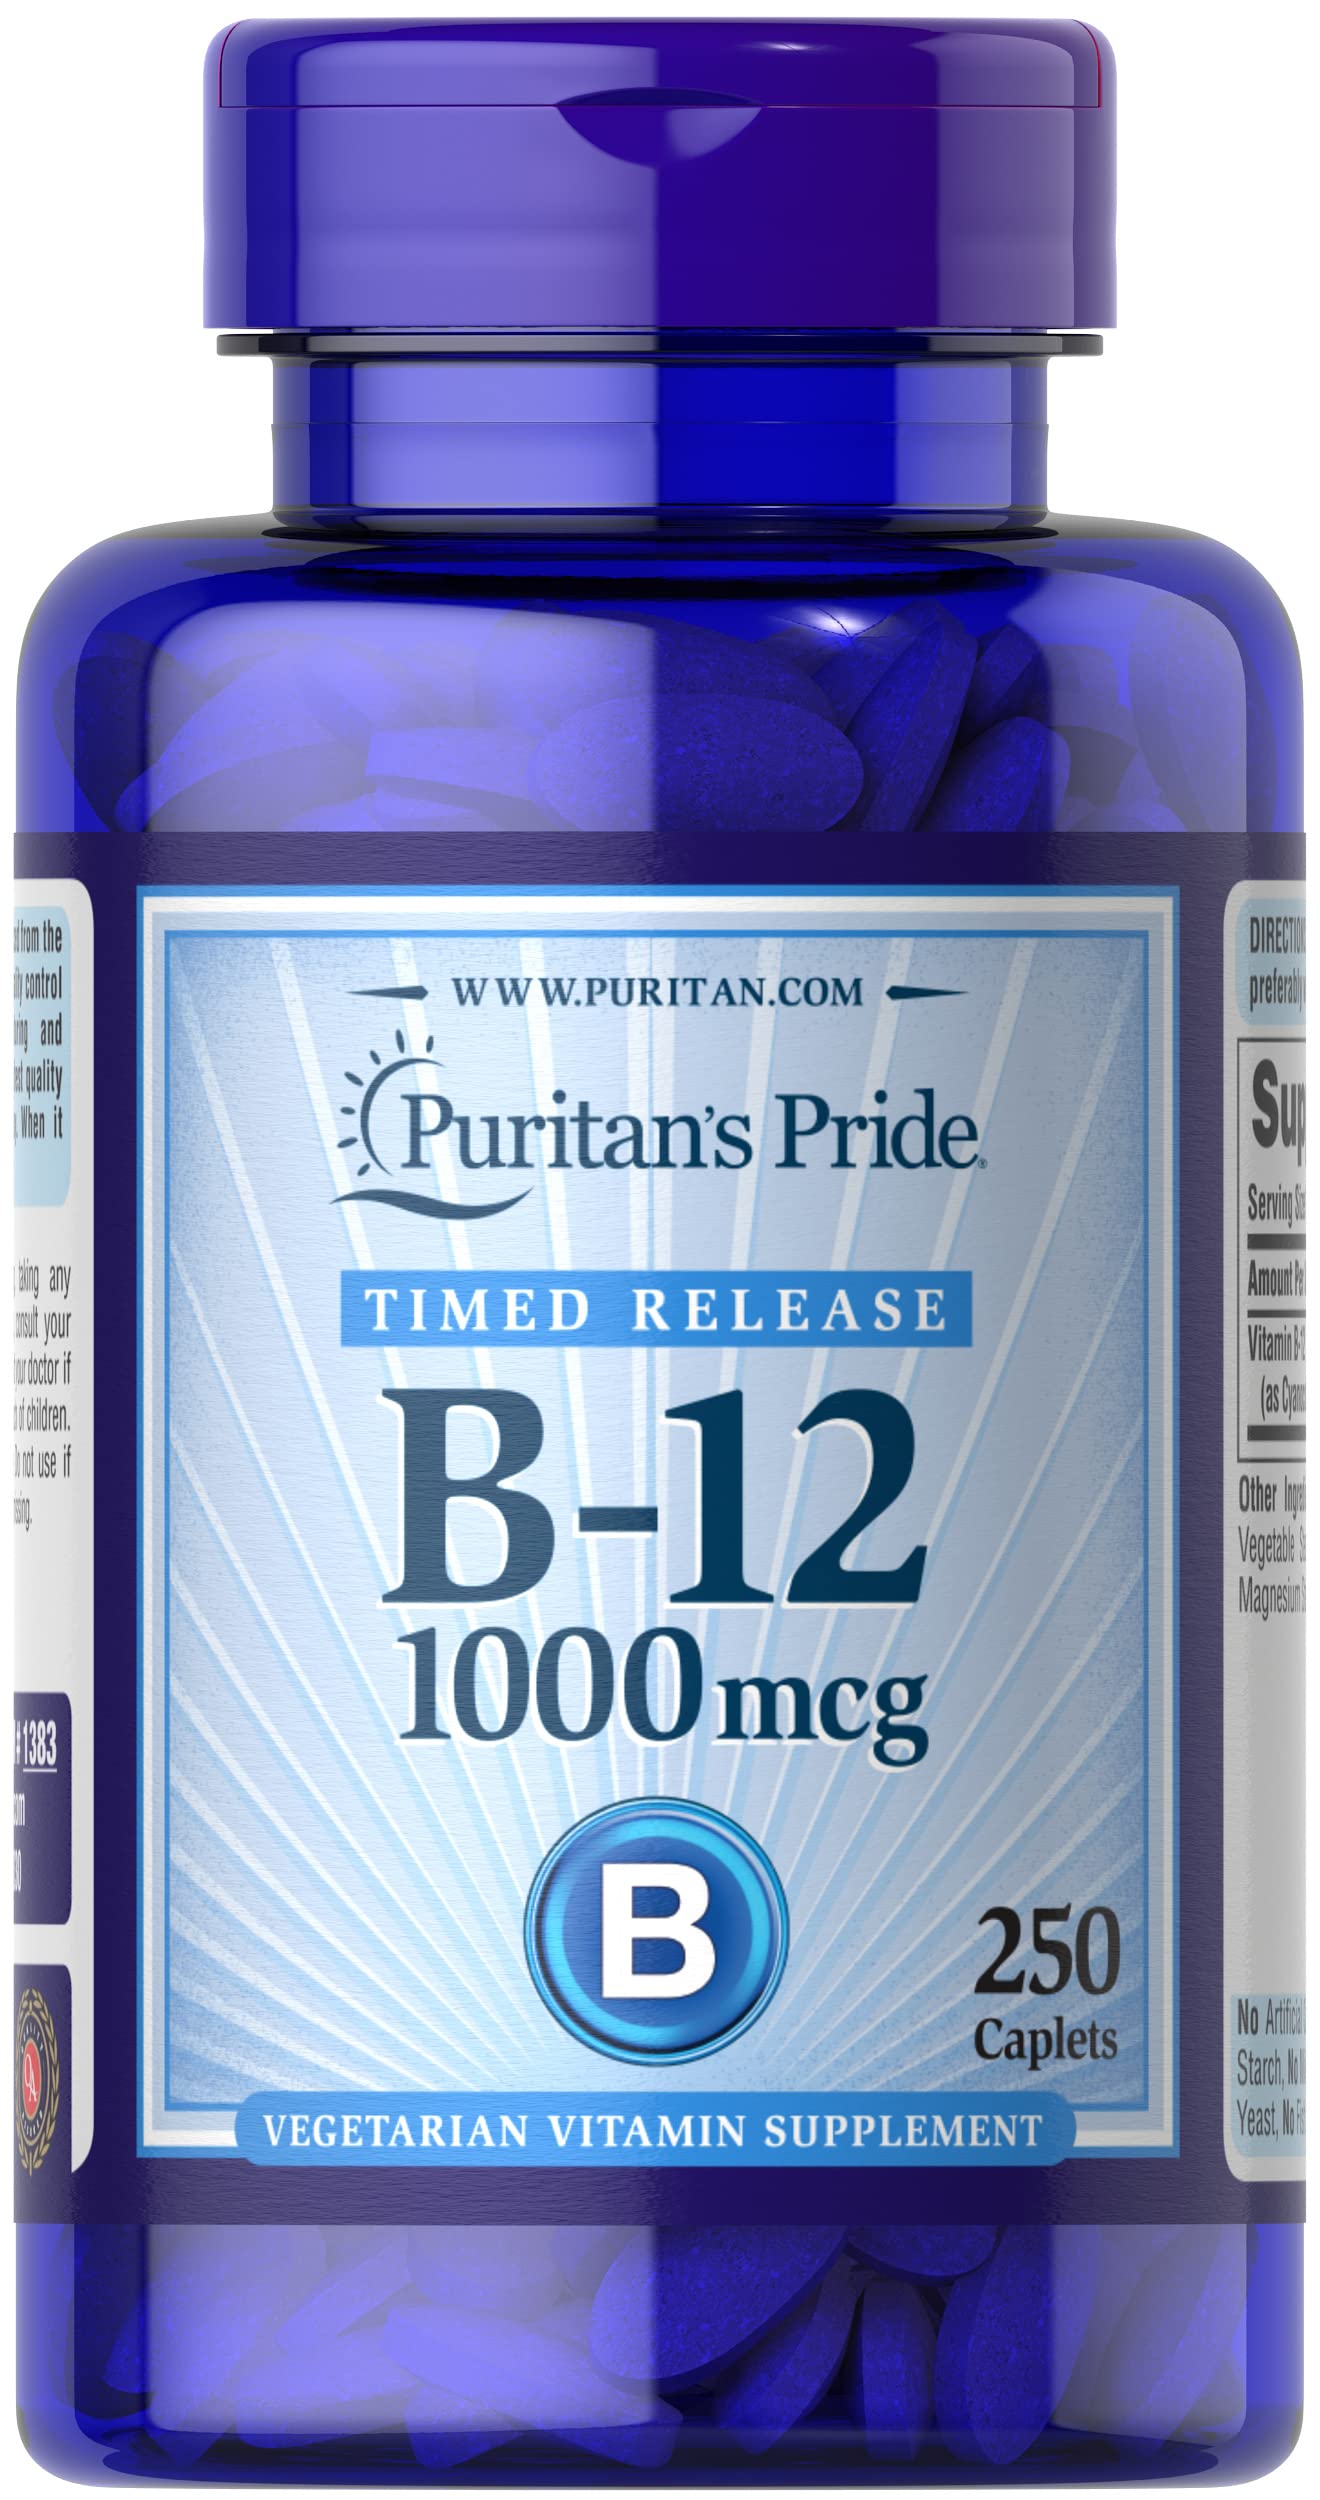 Puritan's Pride Vitamin B-12 1000 Mcg Timed Release Caplets, 250 Count $6.23 w/ Subscribe & Save